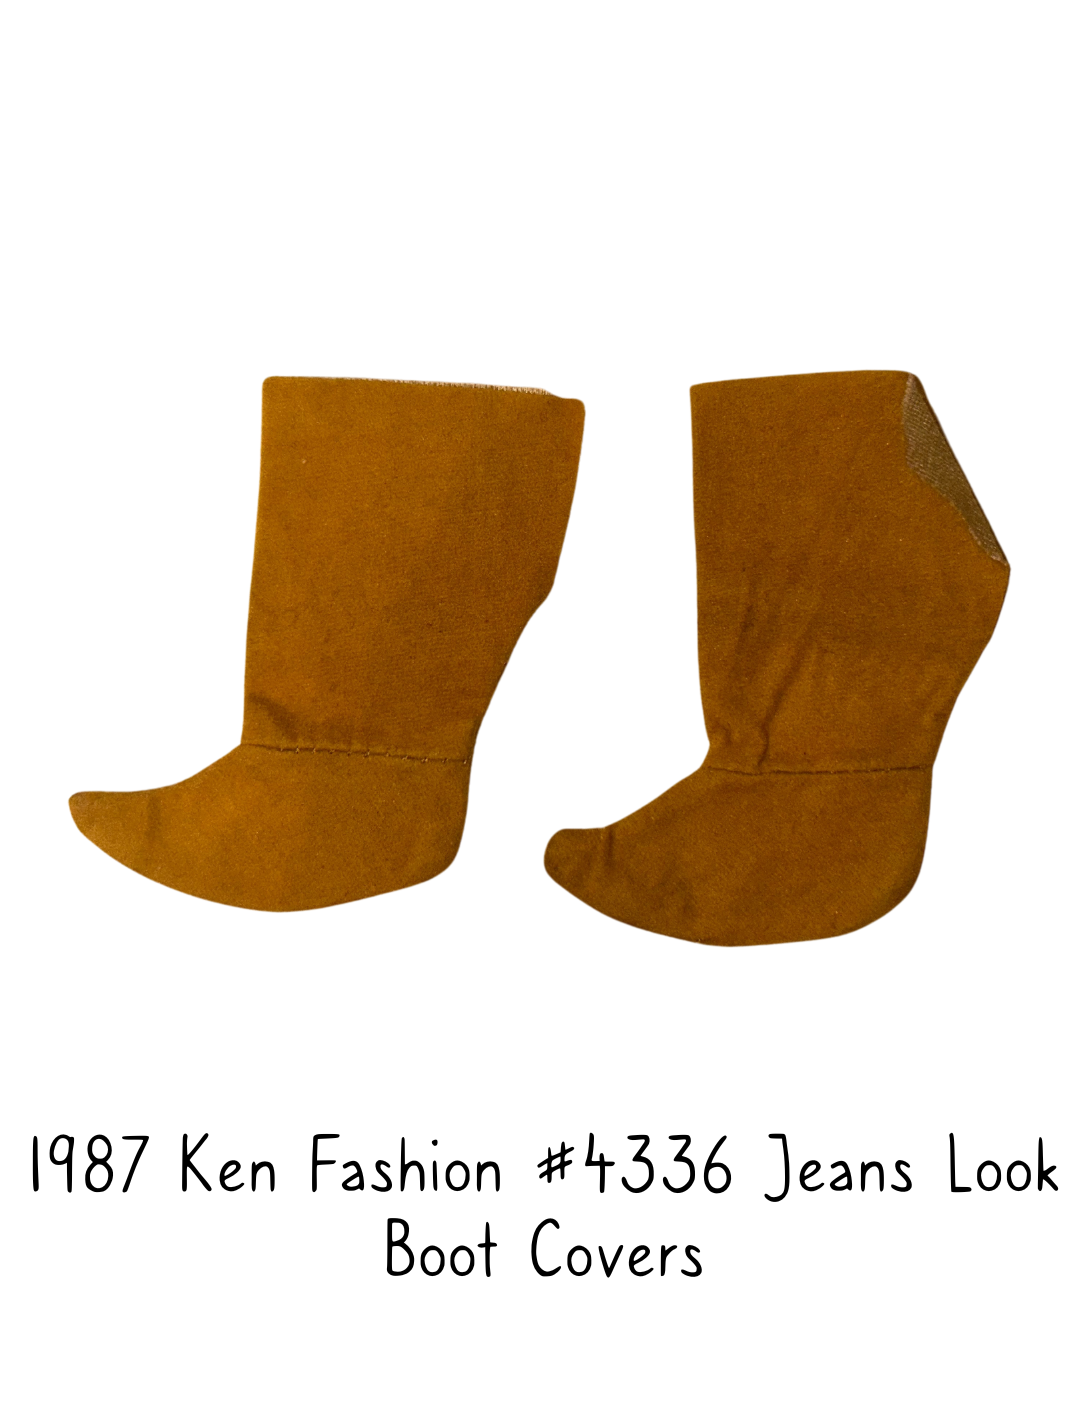 1987 Ken Fashion #4336 Jeans Look Boot Covers